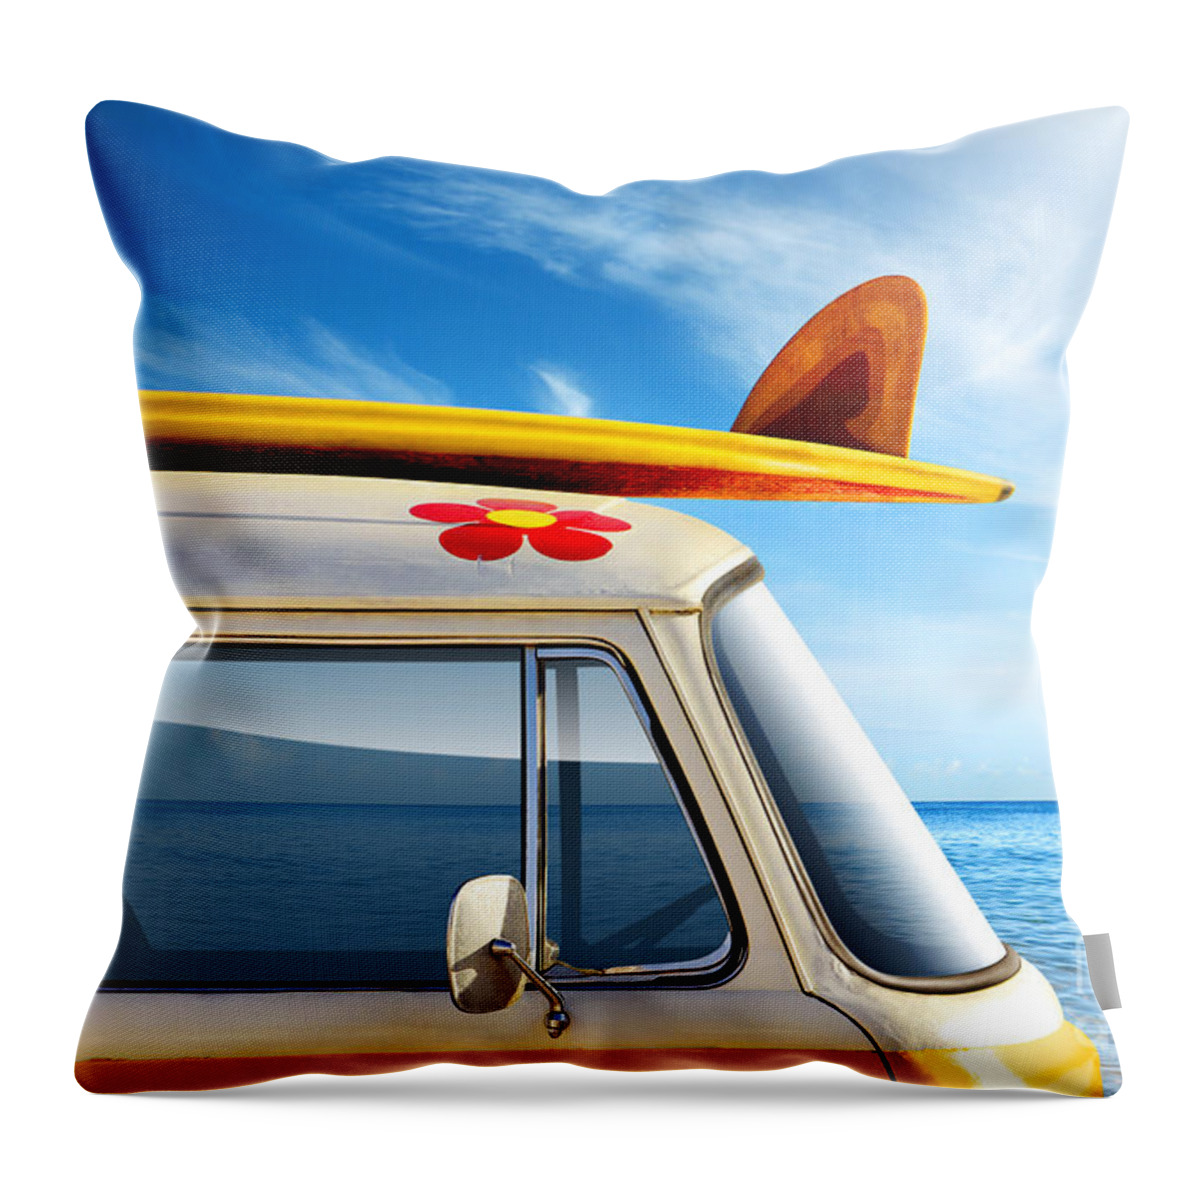 60ties Throw Pillow featuring the photograph Surf Van by Carlos Caetano